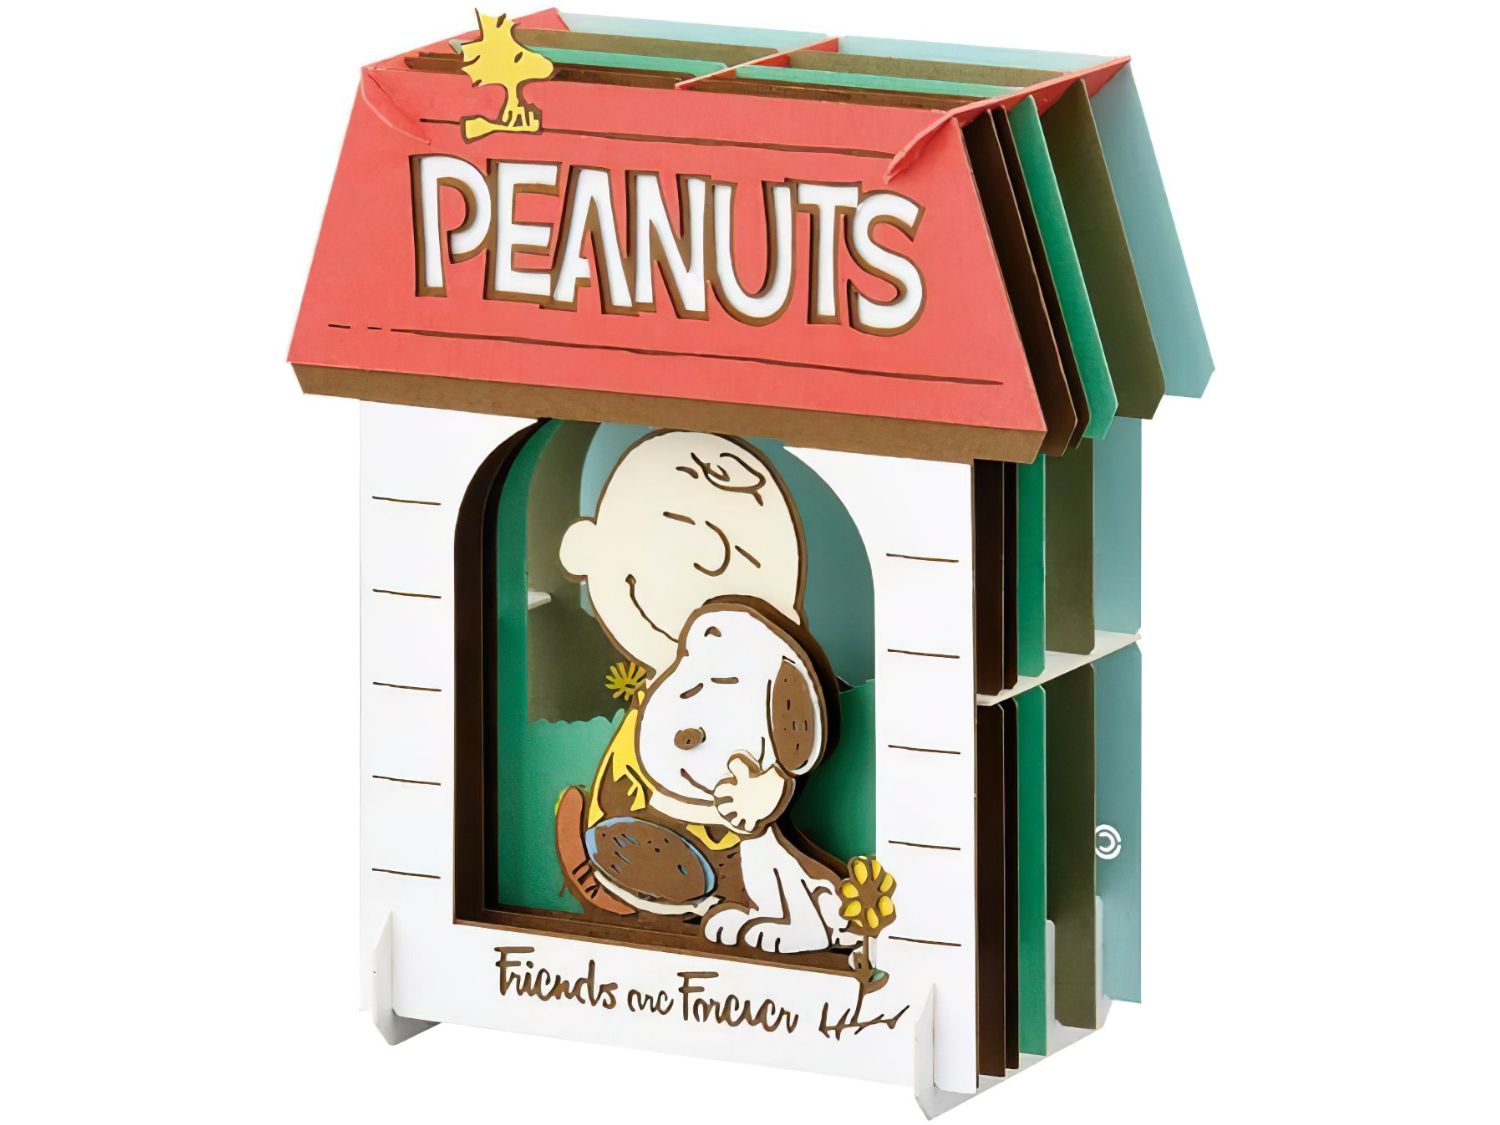 Ensky • Peanuts • Friends are Forever　Paper Theater